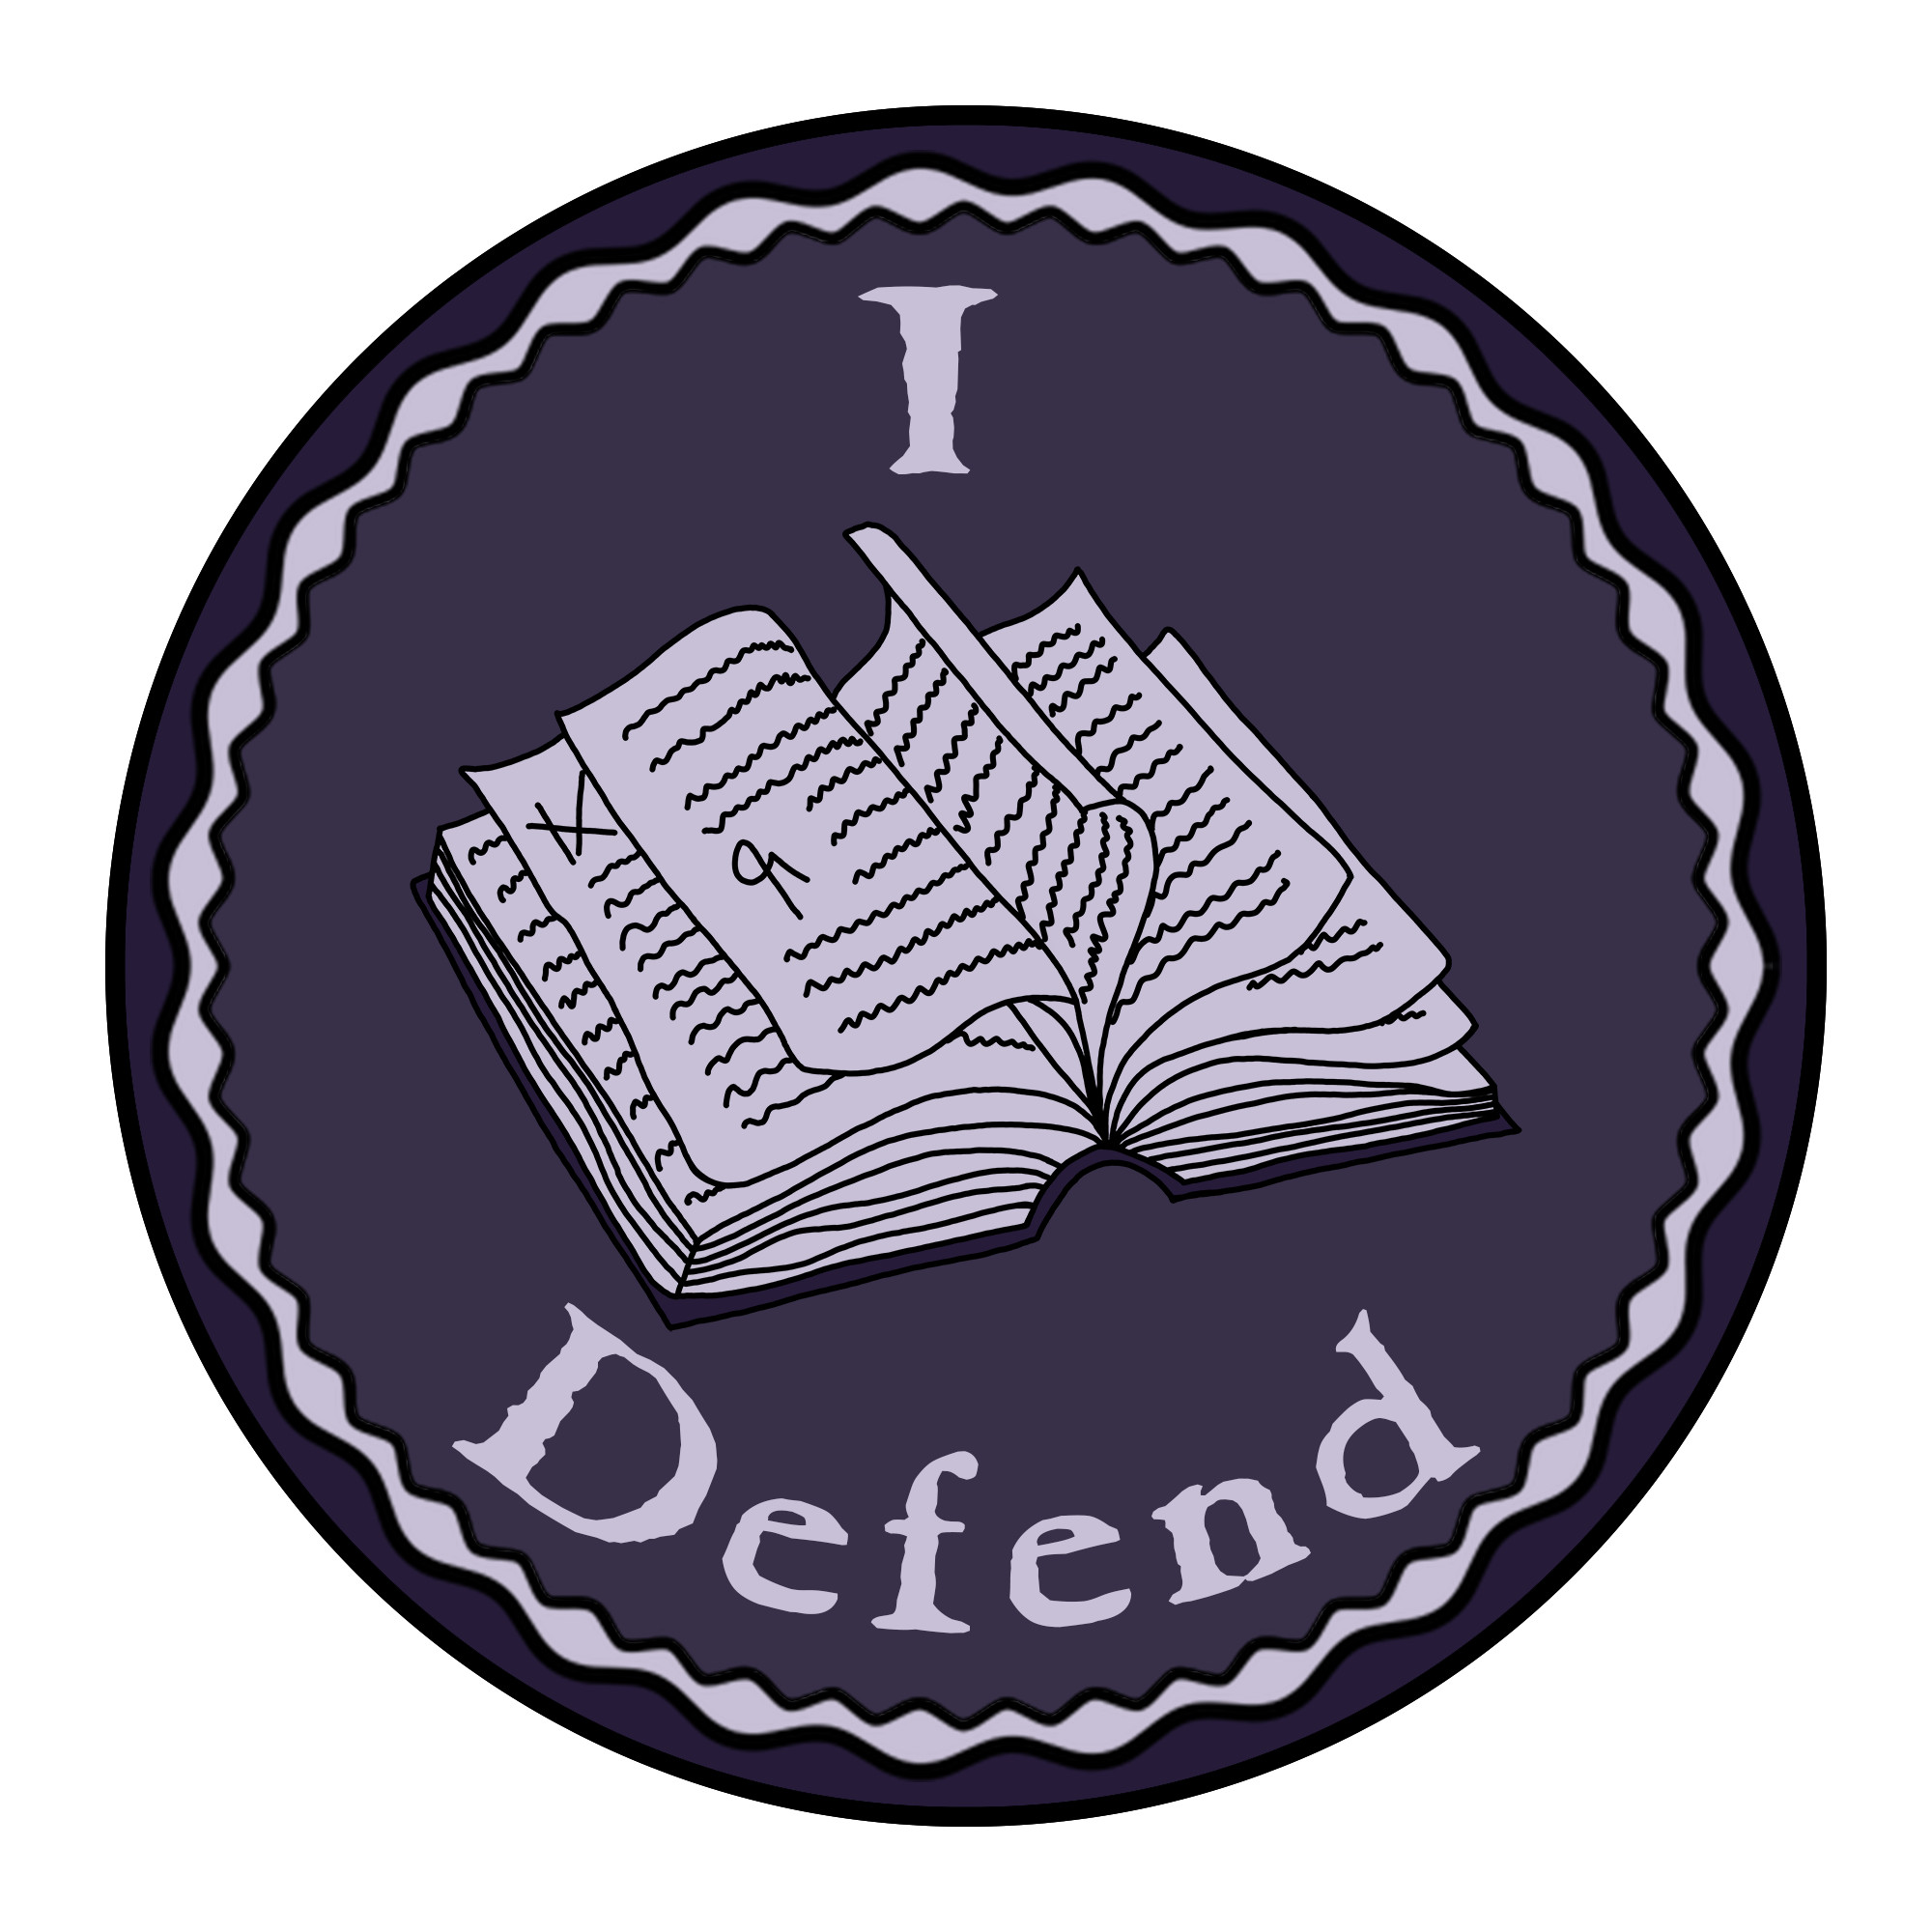 A badge or medal of a book - the Iron Tome - on a navy background. Text: 